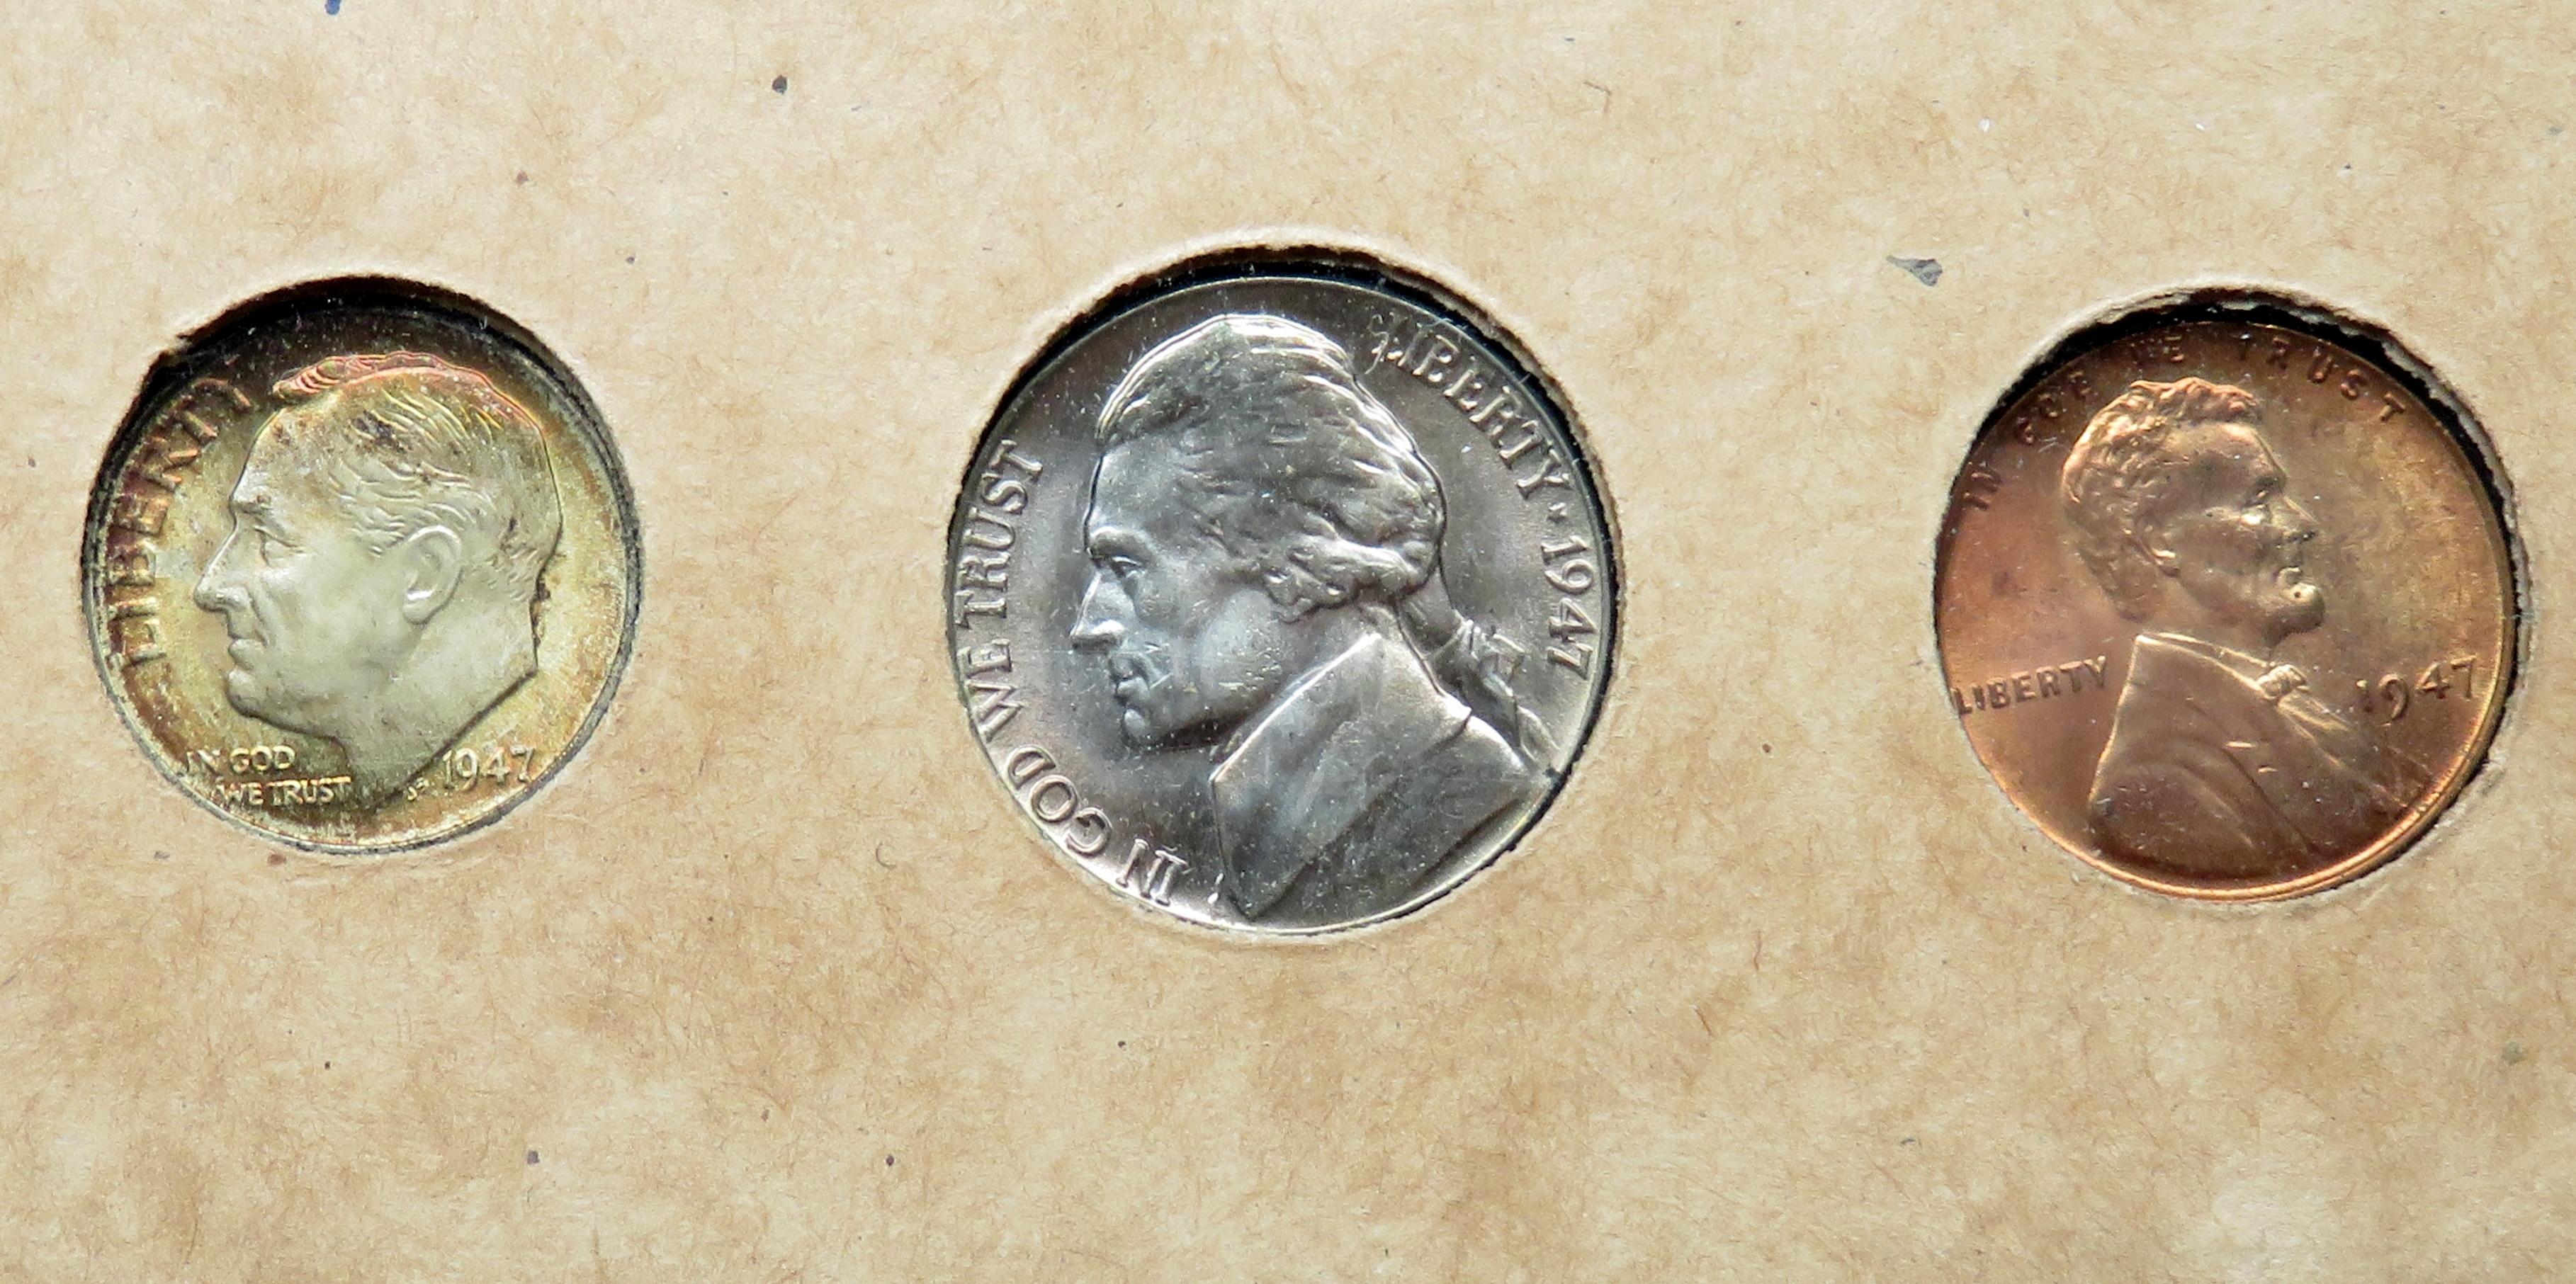 1947 P-D-S Mint Set 28 coins BU, Looks totally original, Beautiful toning on most coins, In Wayte ho